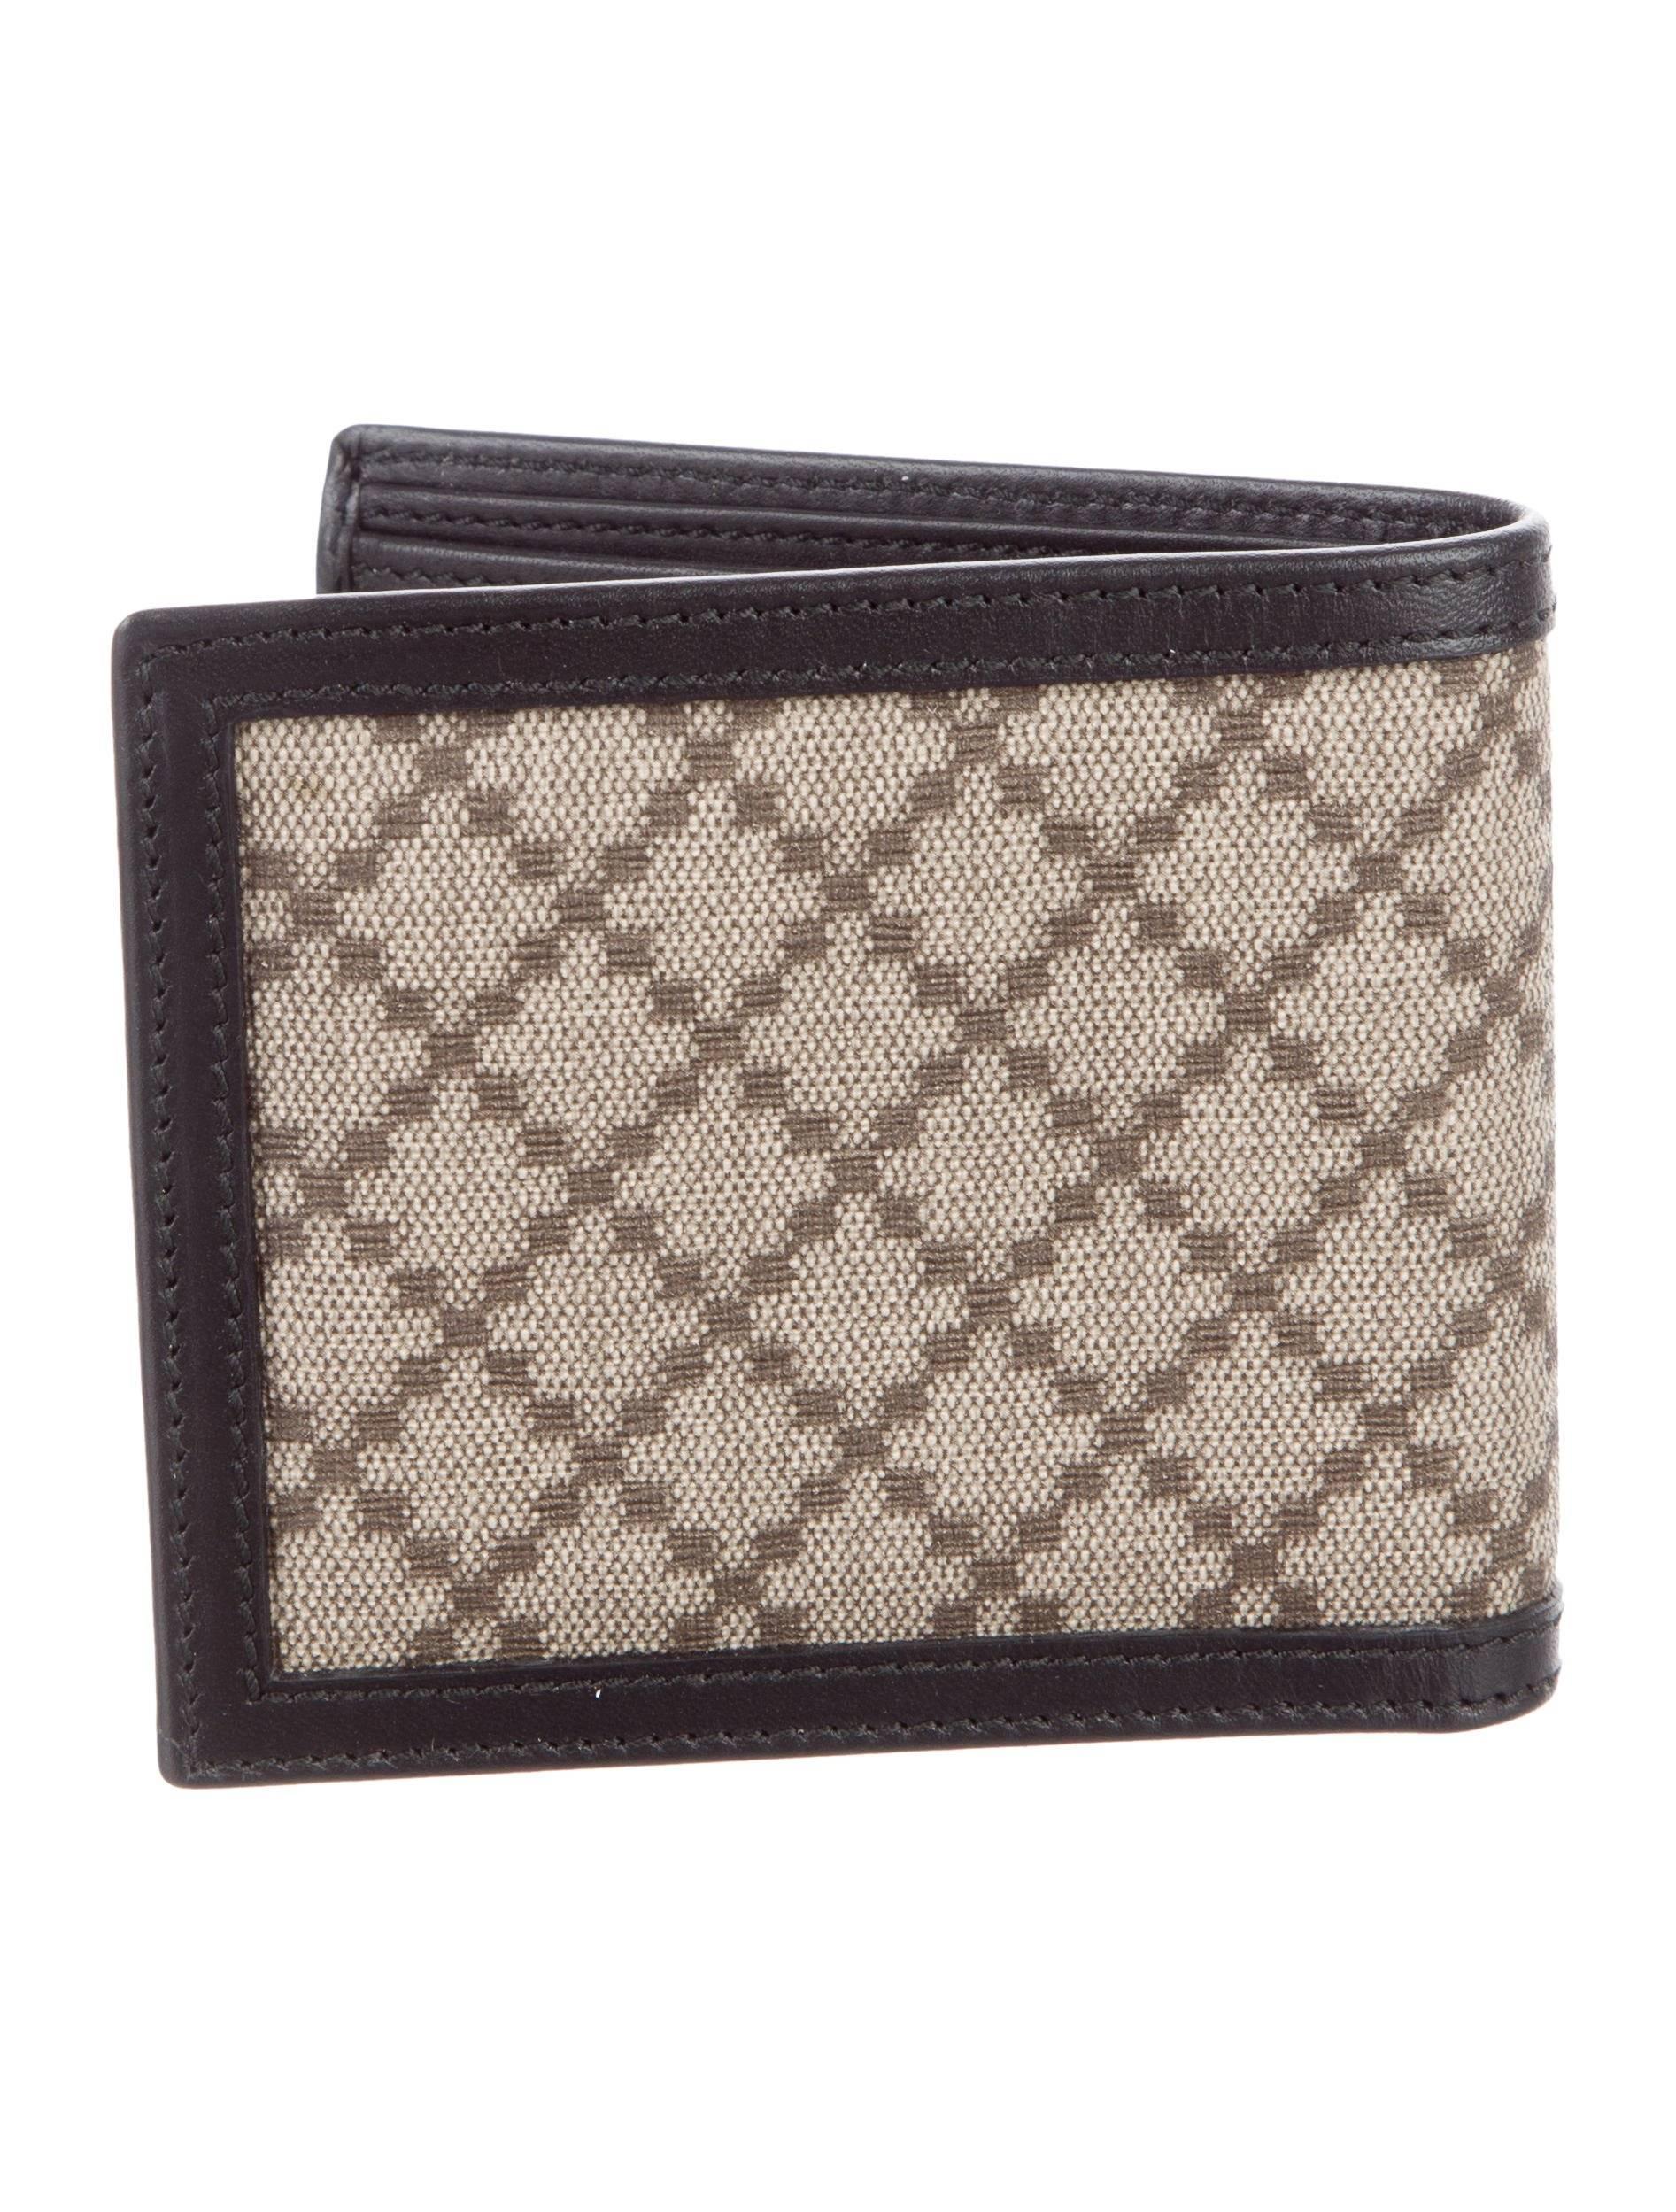 Gucci New Monogram Canvas Leather Men's Bifold Suit Wallet in Box

Canvas
Leather
Made in Italy
Features bill compartments and size card slots
Measures 4" W x 3.75" H x 0.75" D
Includes original Gucci box